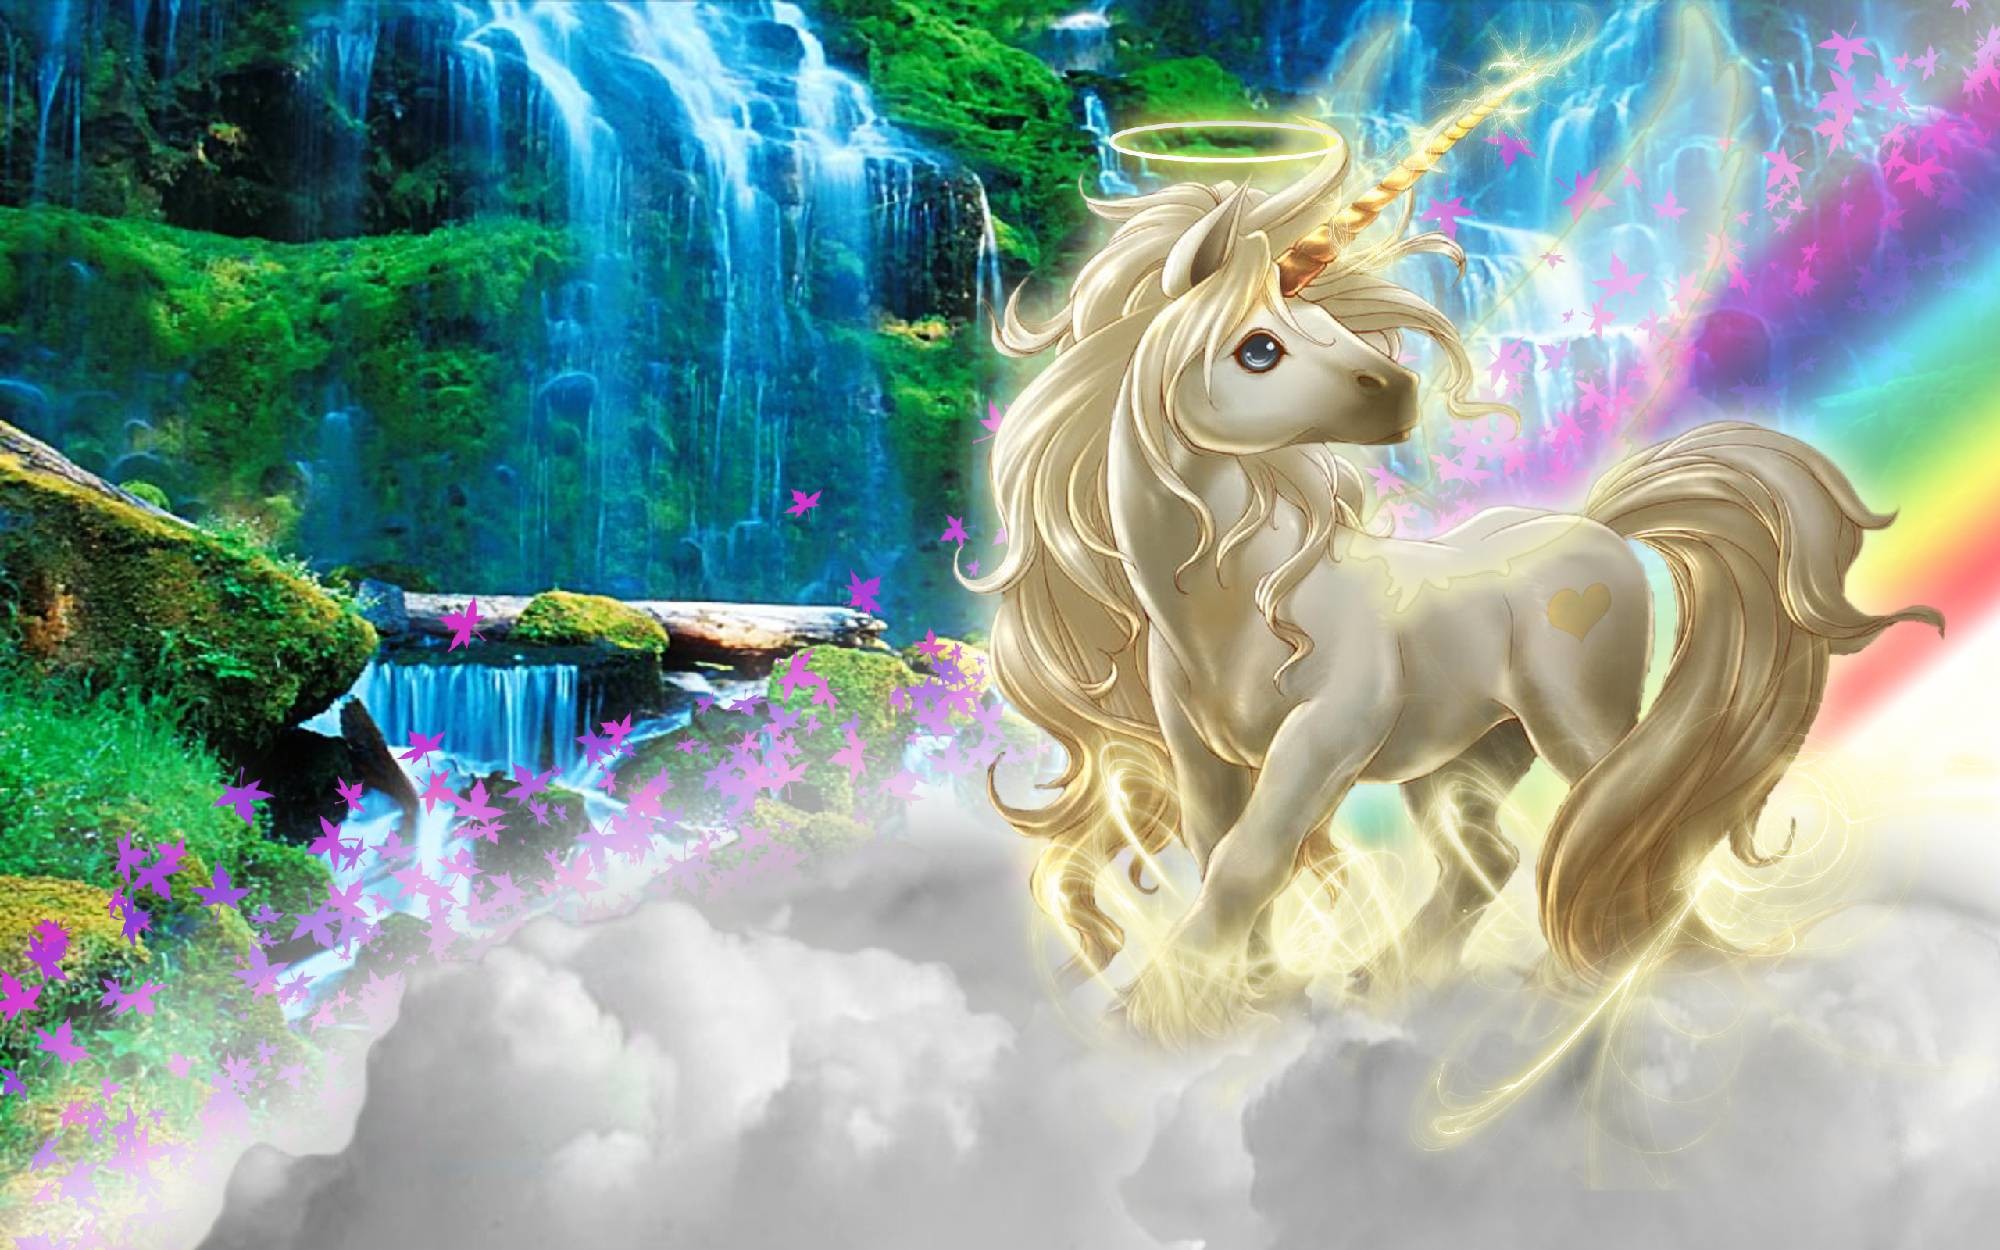 2000x1250 Wallpapers For > Pegasus And Unicorn Wallpaper